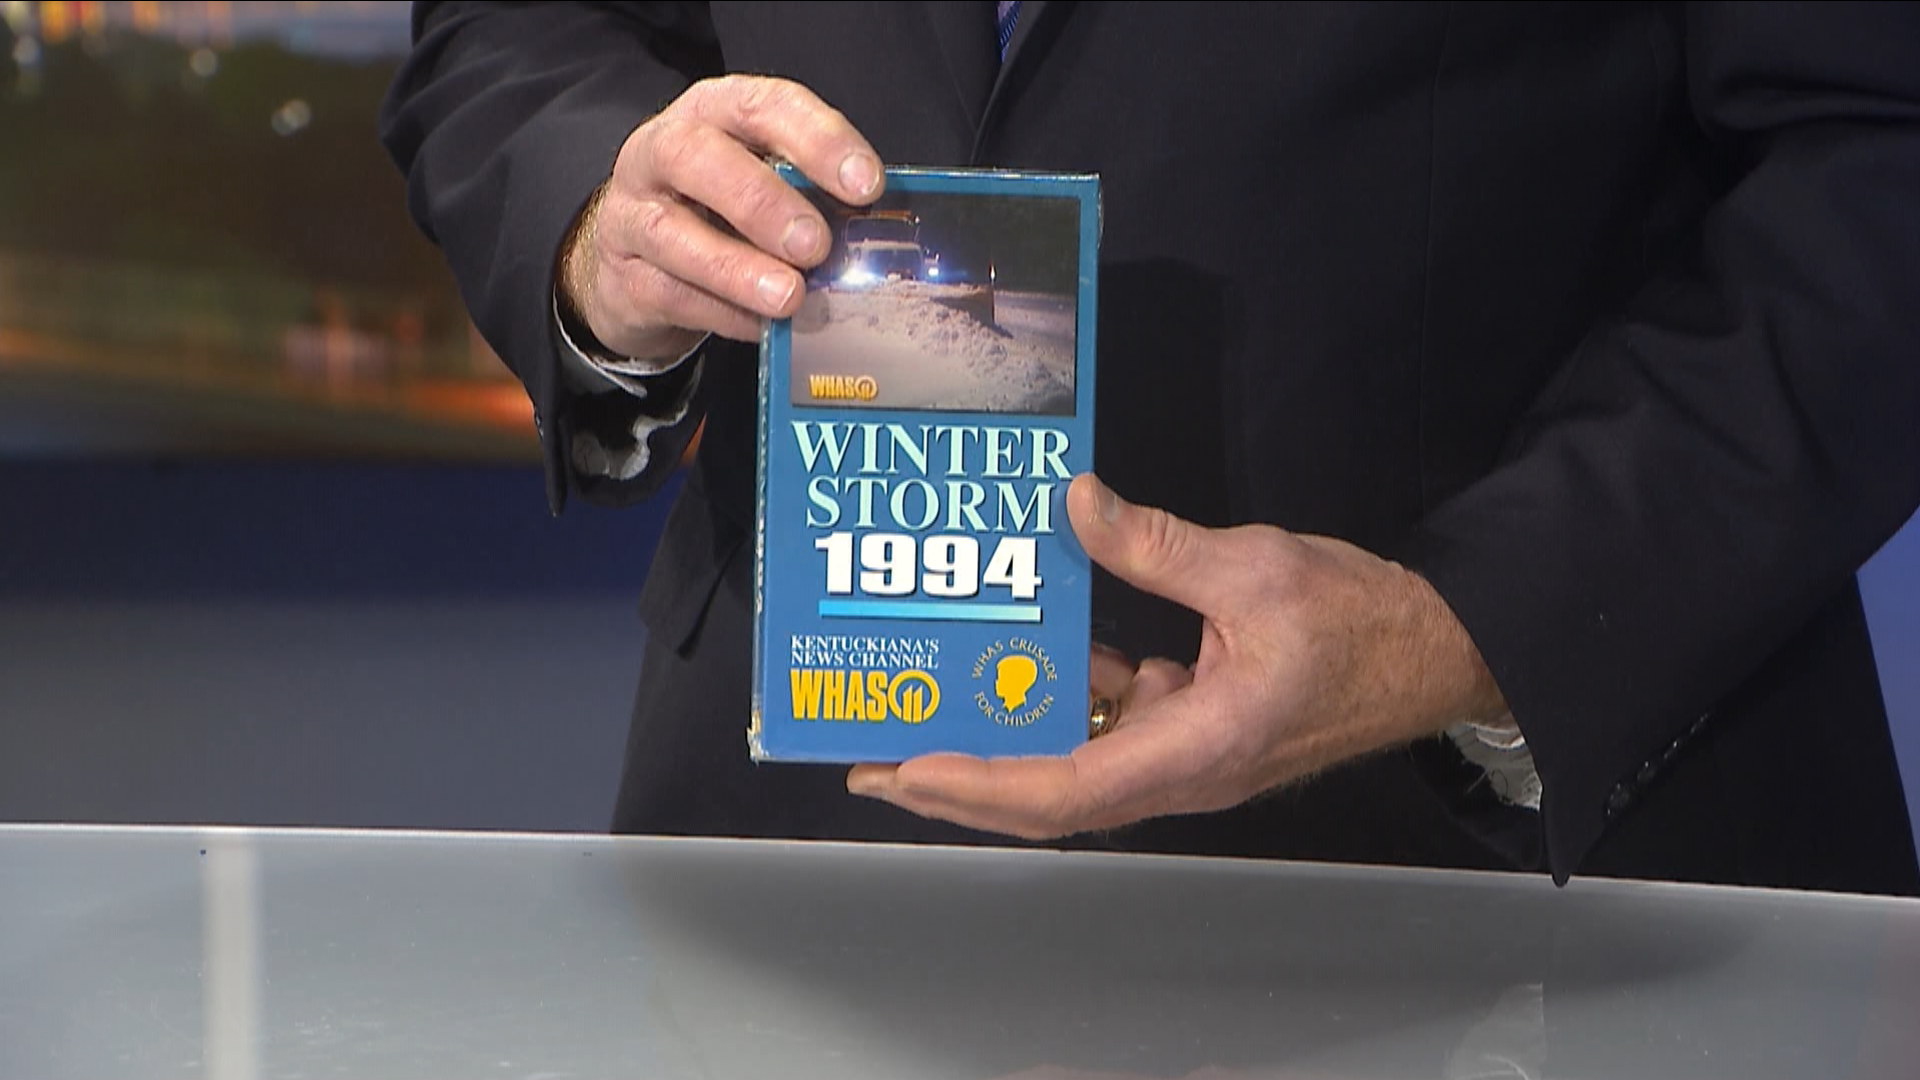 During the Winter storm of 1994, viewers were stuck at home and tuned into our extensive coverage of one of the biggest weather stories we had ever seen.